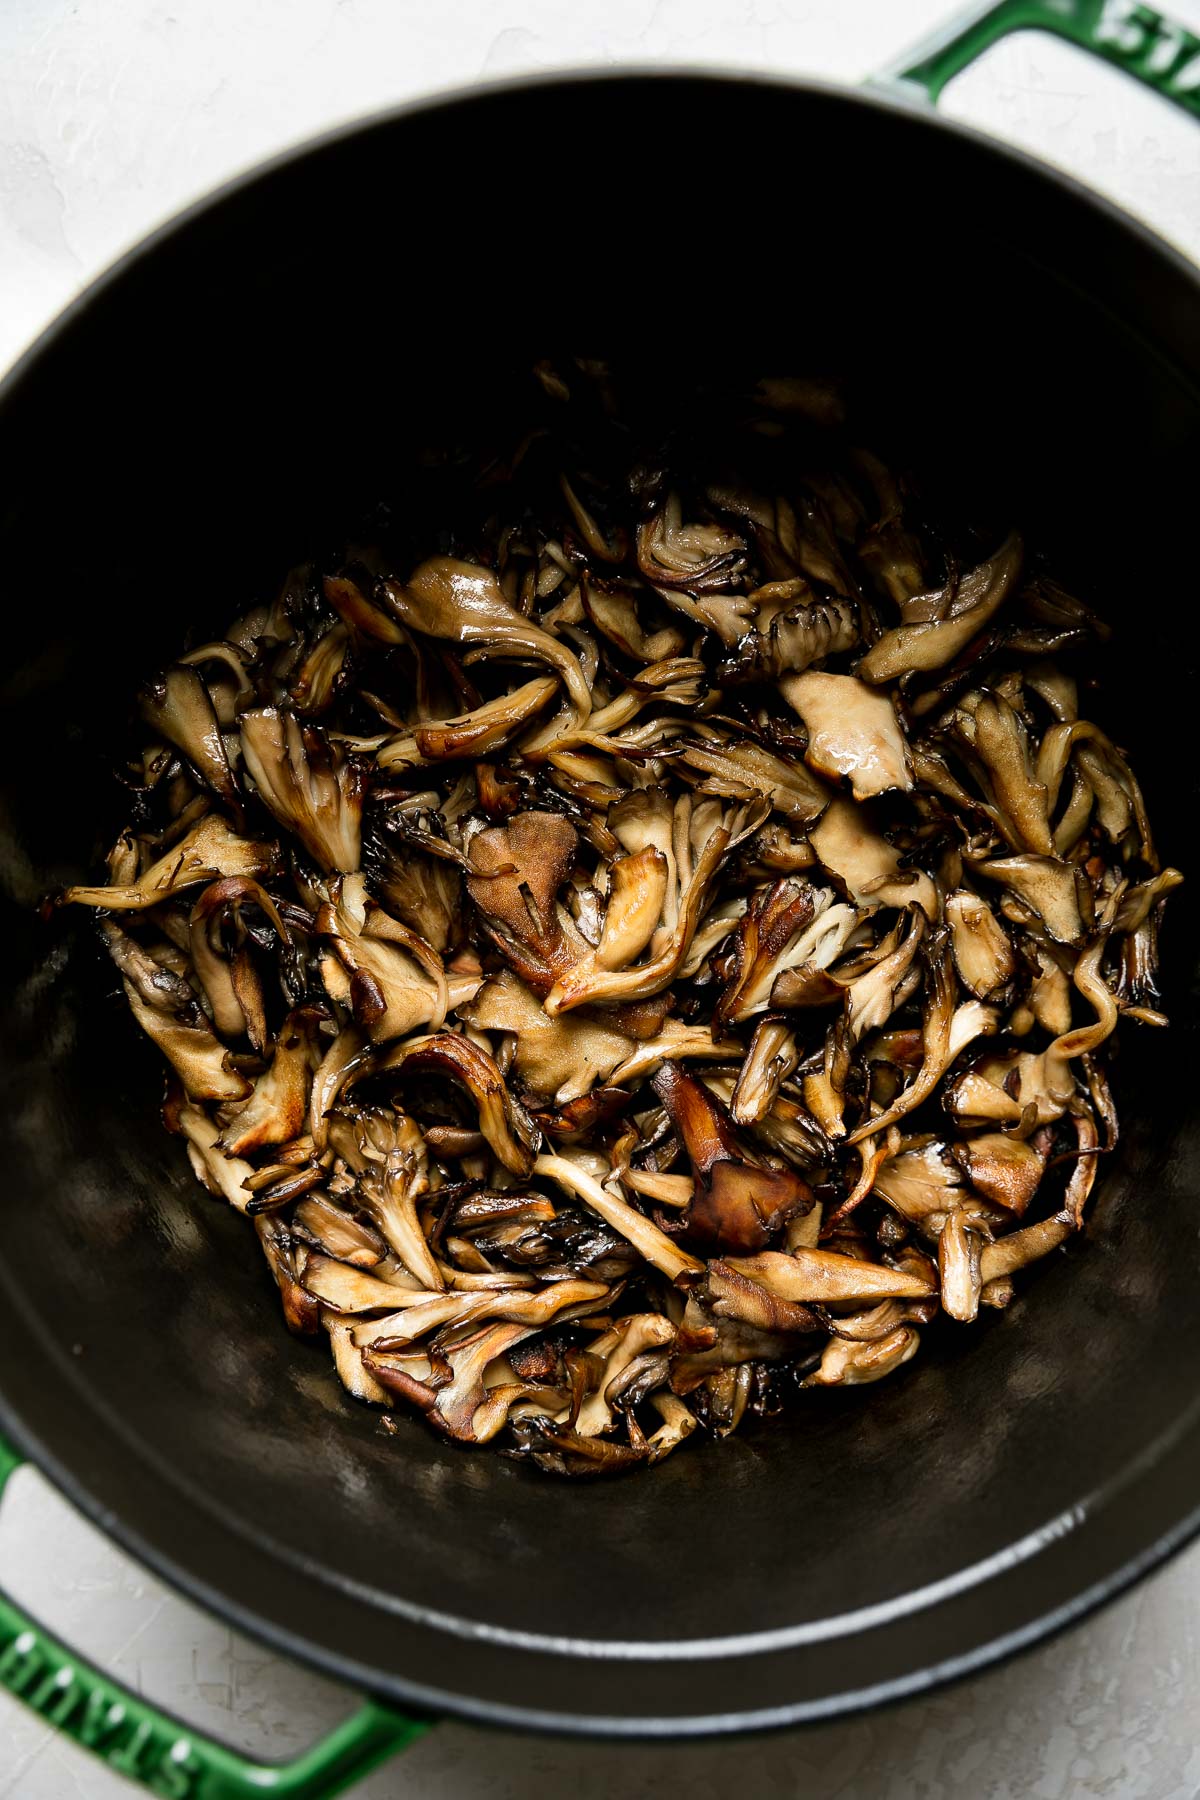 How to make wild mushroom ragu step 1: fresh mushrooms brown in the bottom of a green Staub cocotte. The cocotte sits atop a creamy white textured surface.